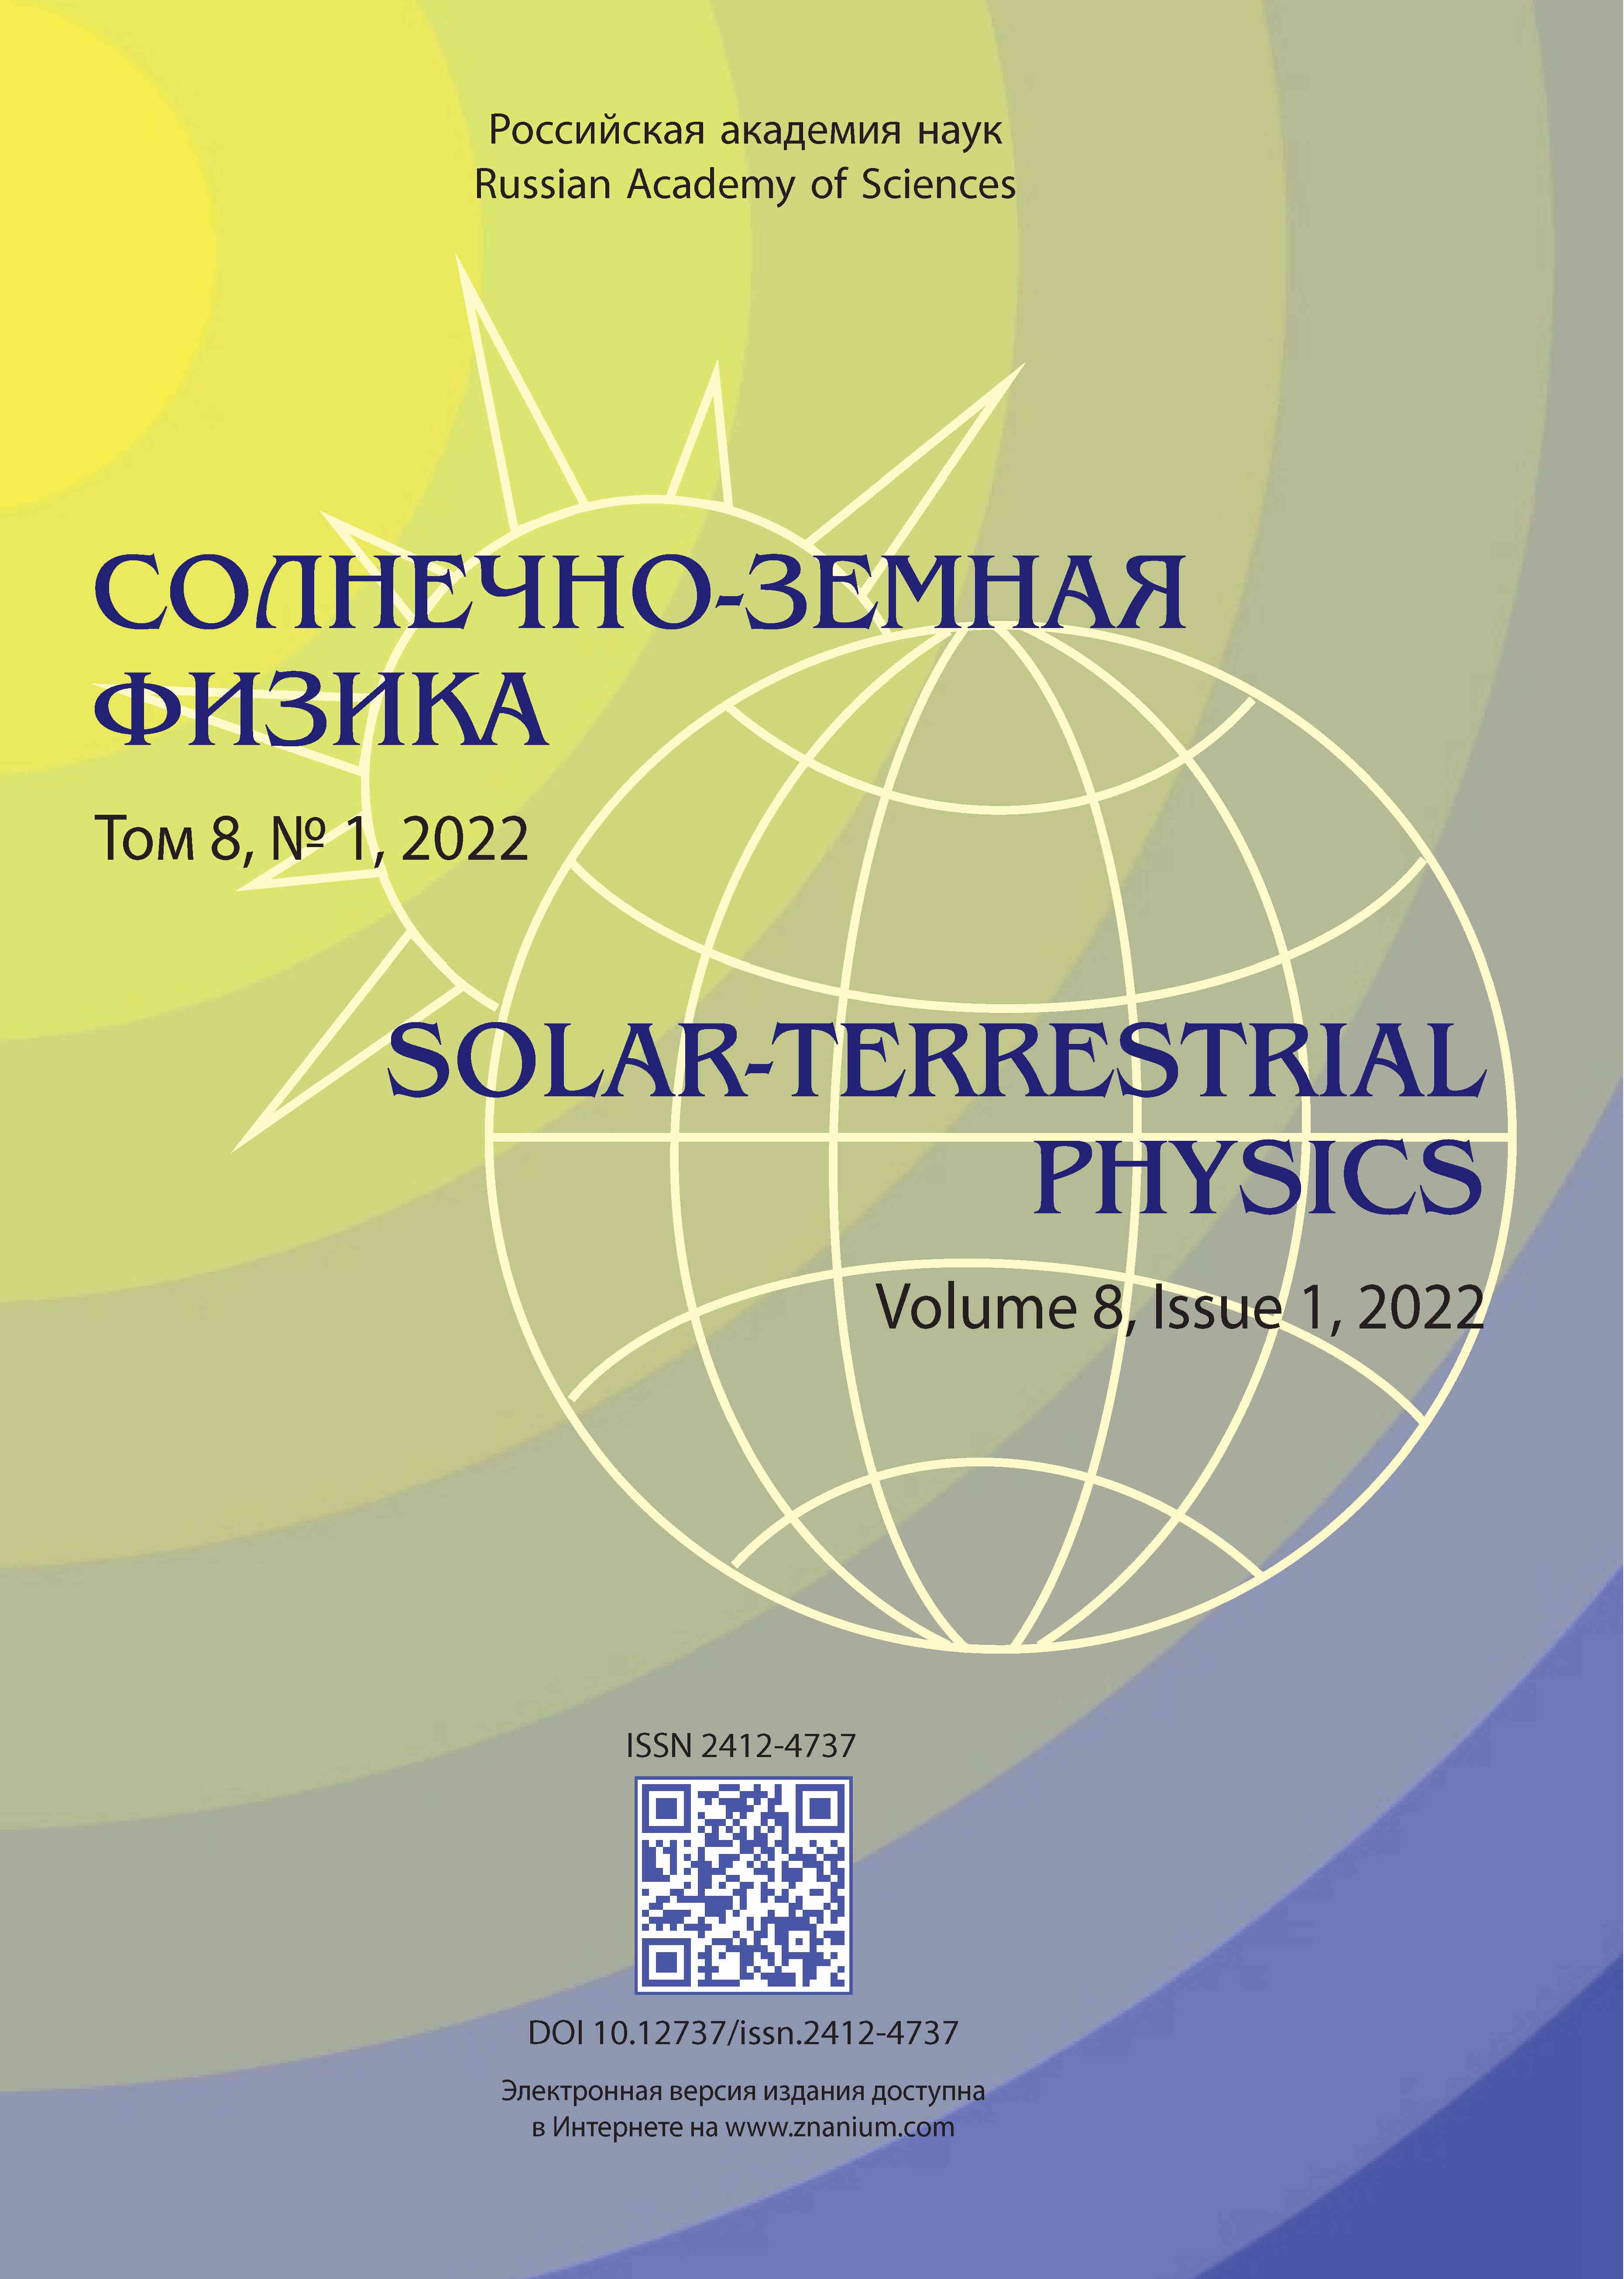                         The current state of the theory of Pc1 range ULF pulsations in magnetospheric plasma with heavy ions: A review
            